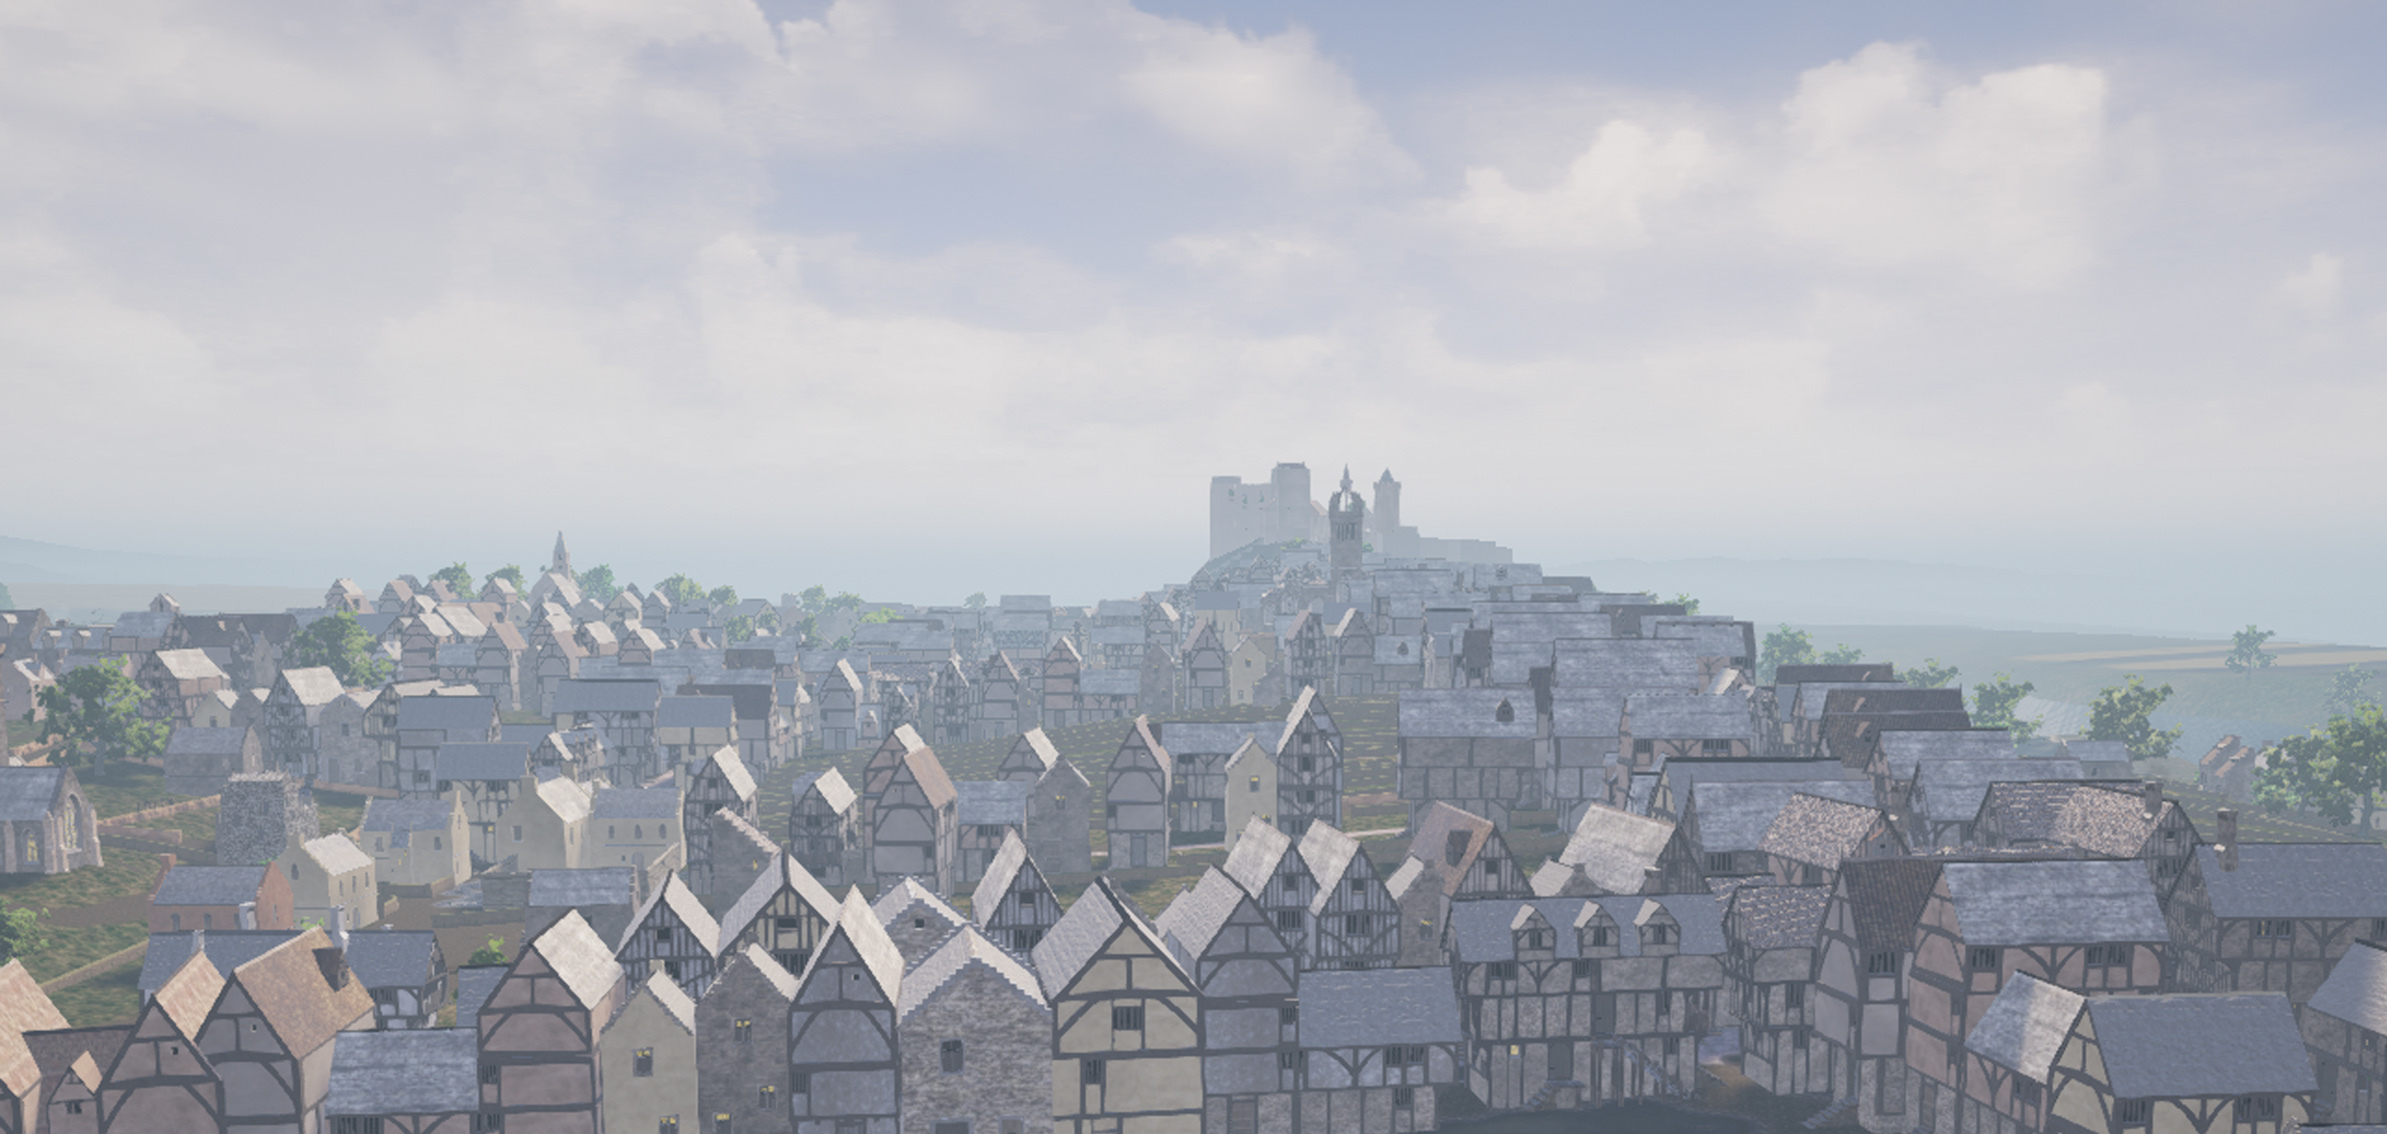 The reconstruction shows Edinburgh as it was almost 500 years ago.